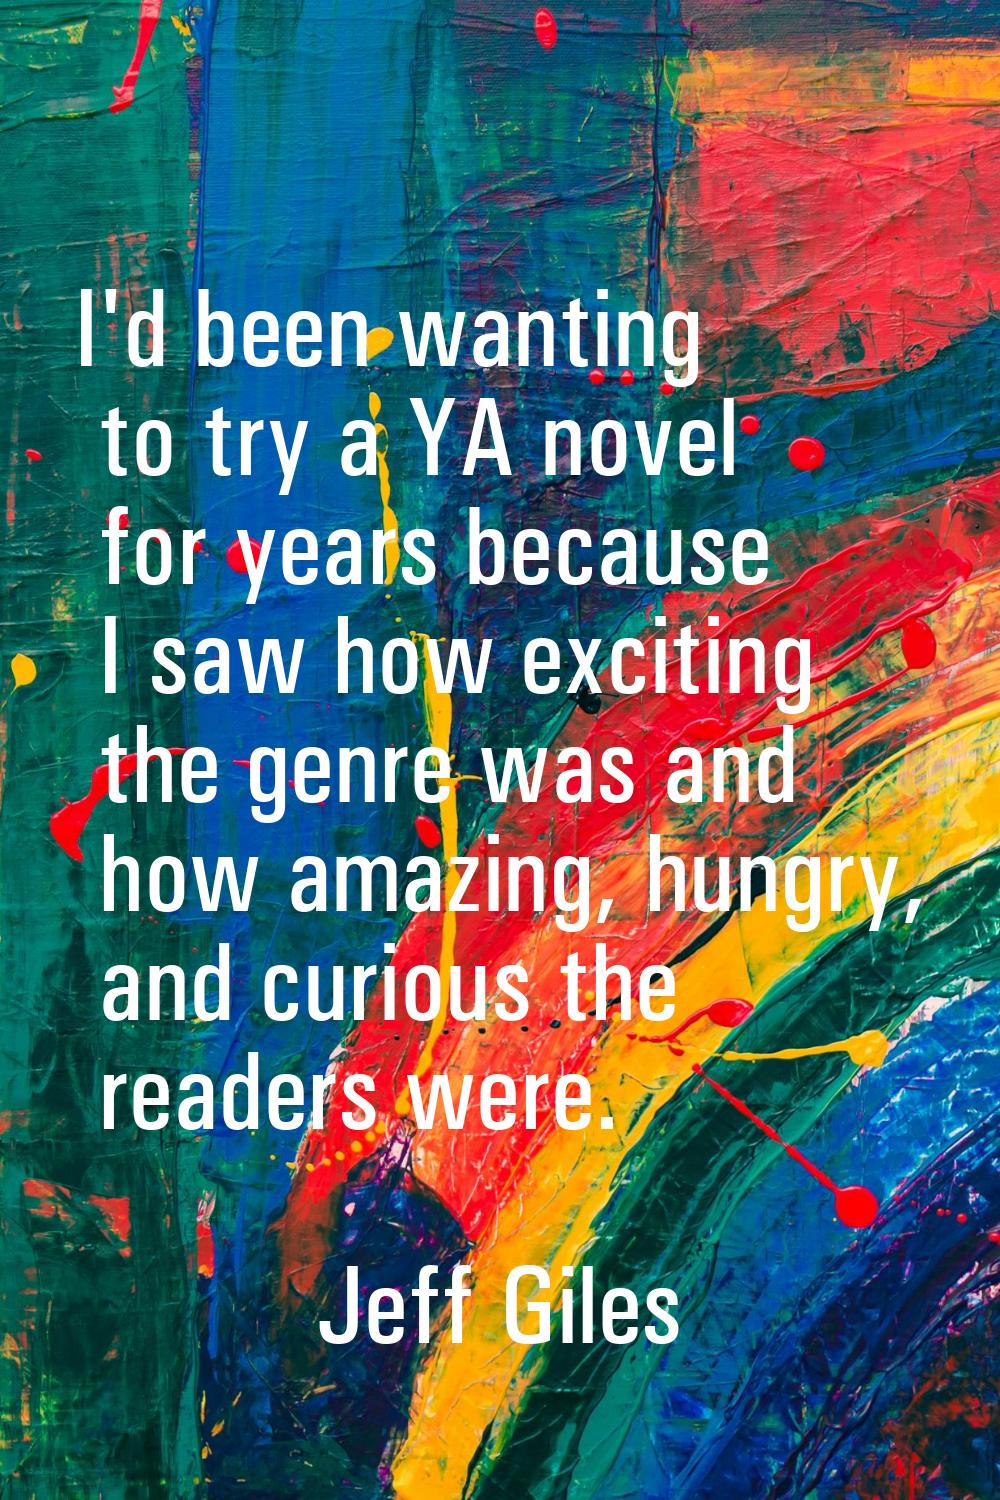 I'd been wanting to try a YA novel for years because I saw how exciting the genre was and how amazi